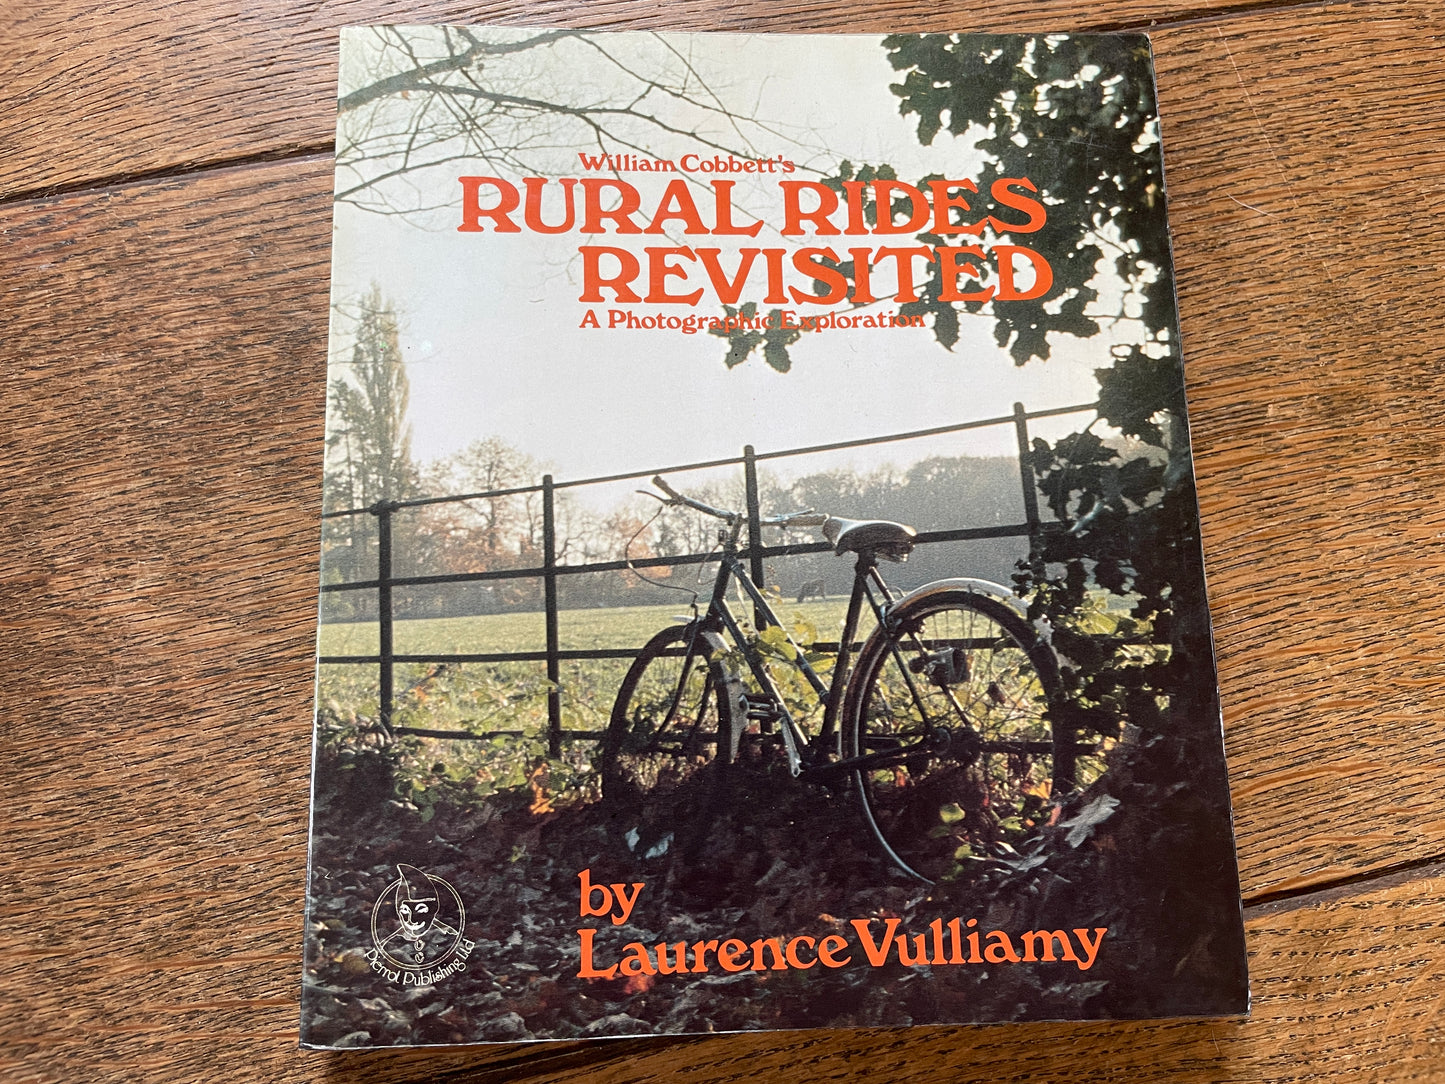 Rural Rides Revisited by Laurence Vulliamy